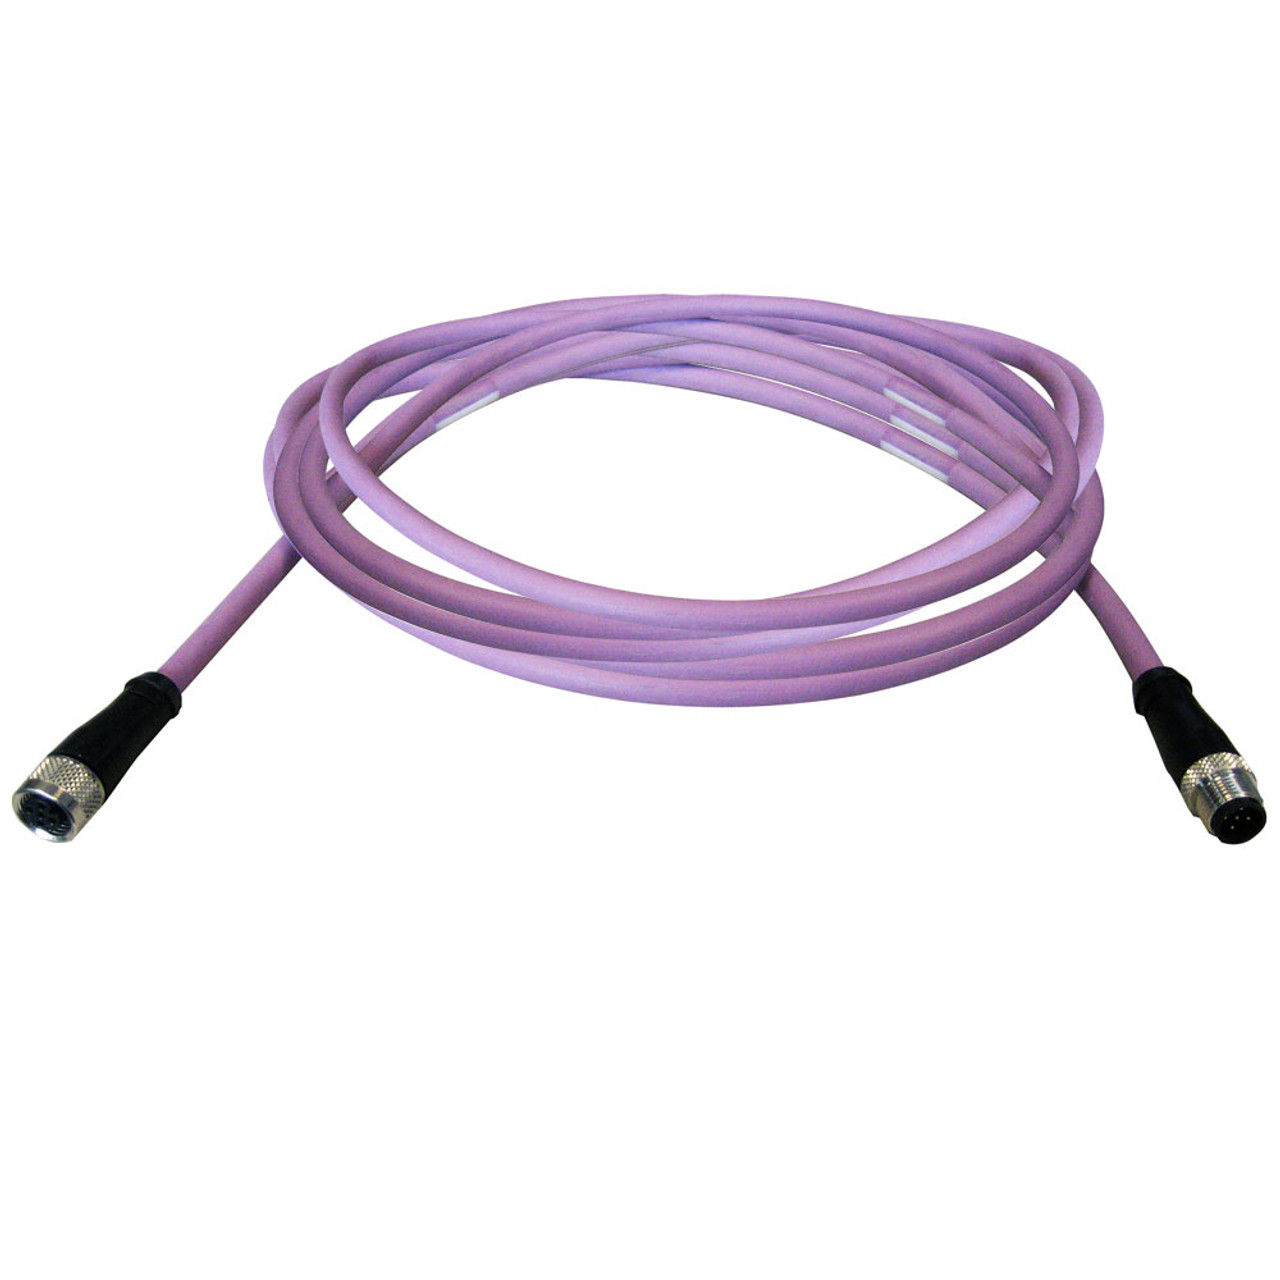 UFlex Power A CAN-7 Network Connection Cable - 22.9' [73681S]